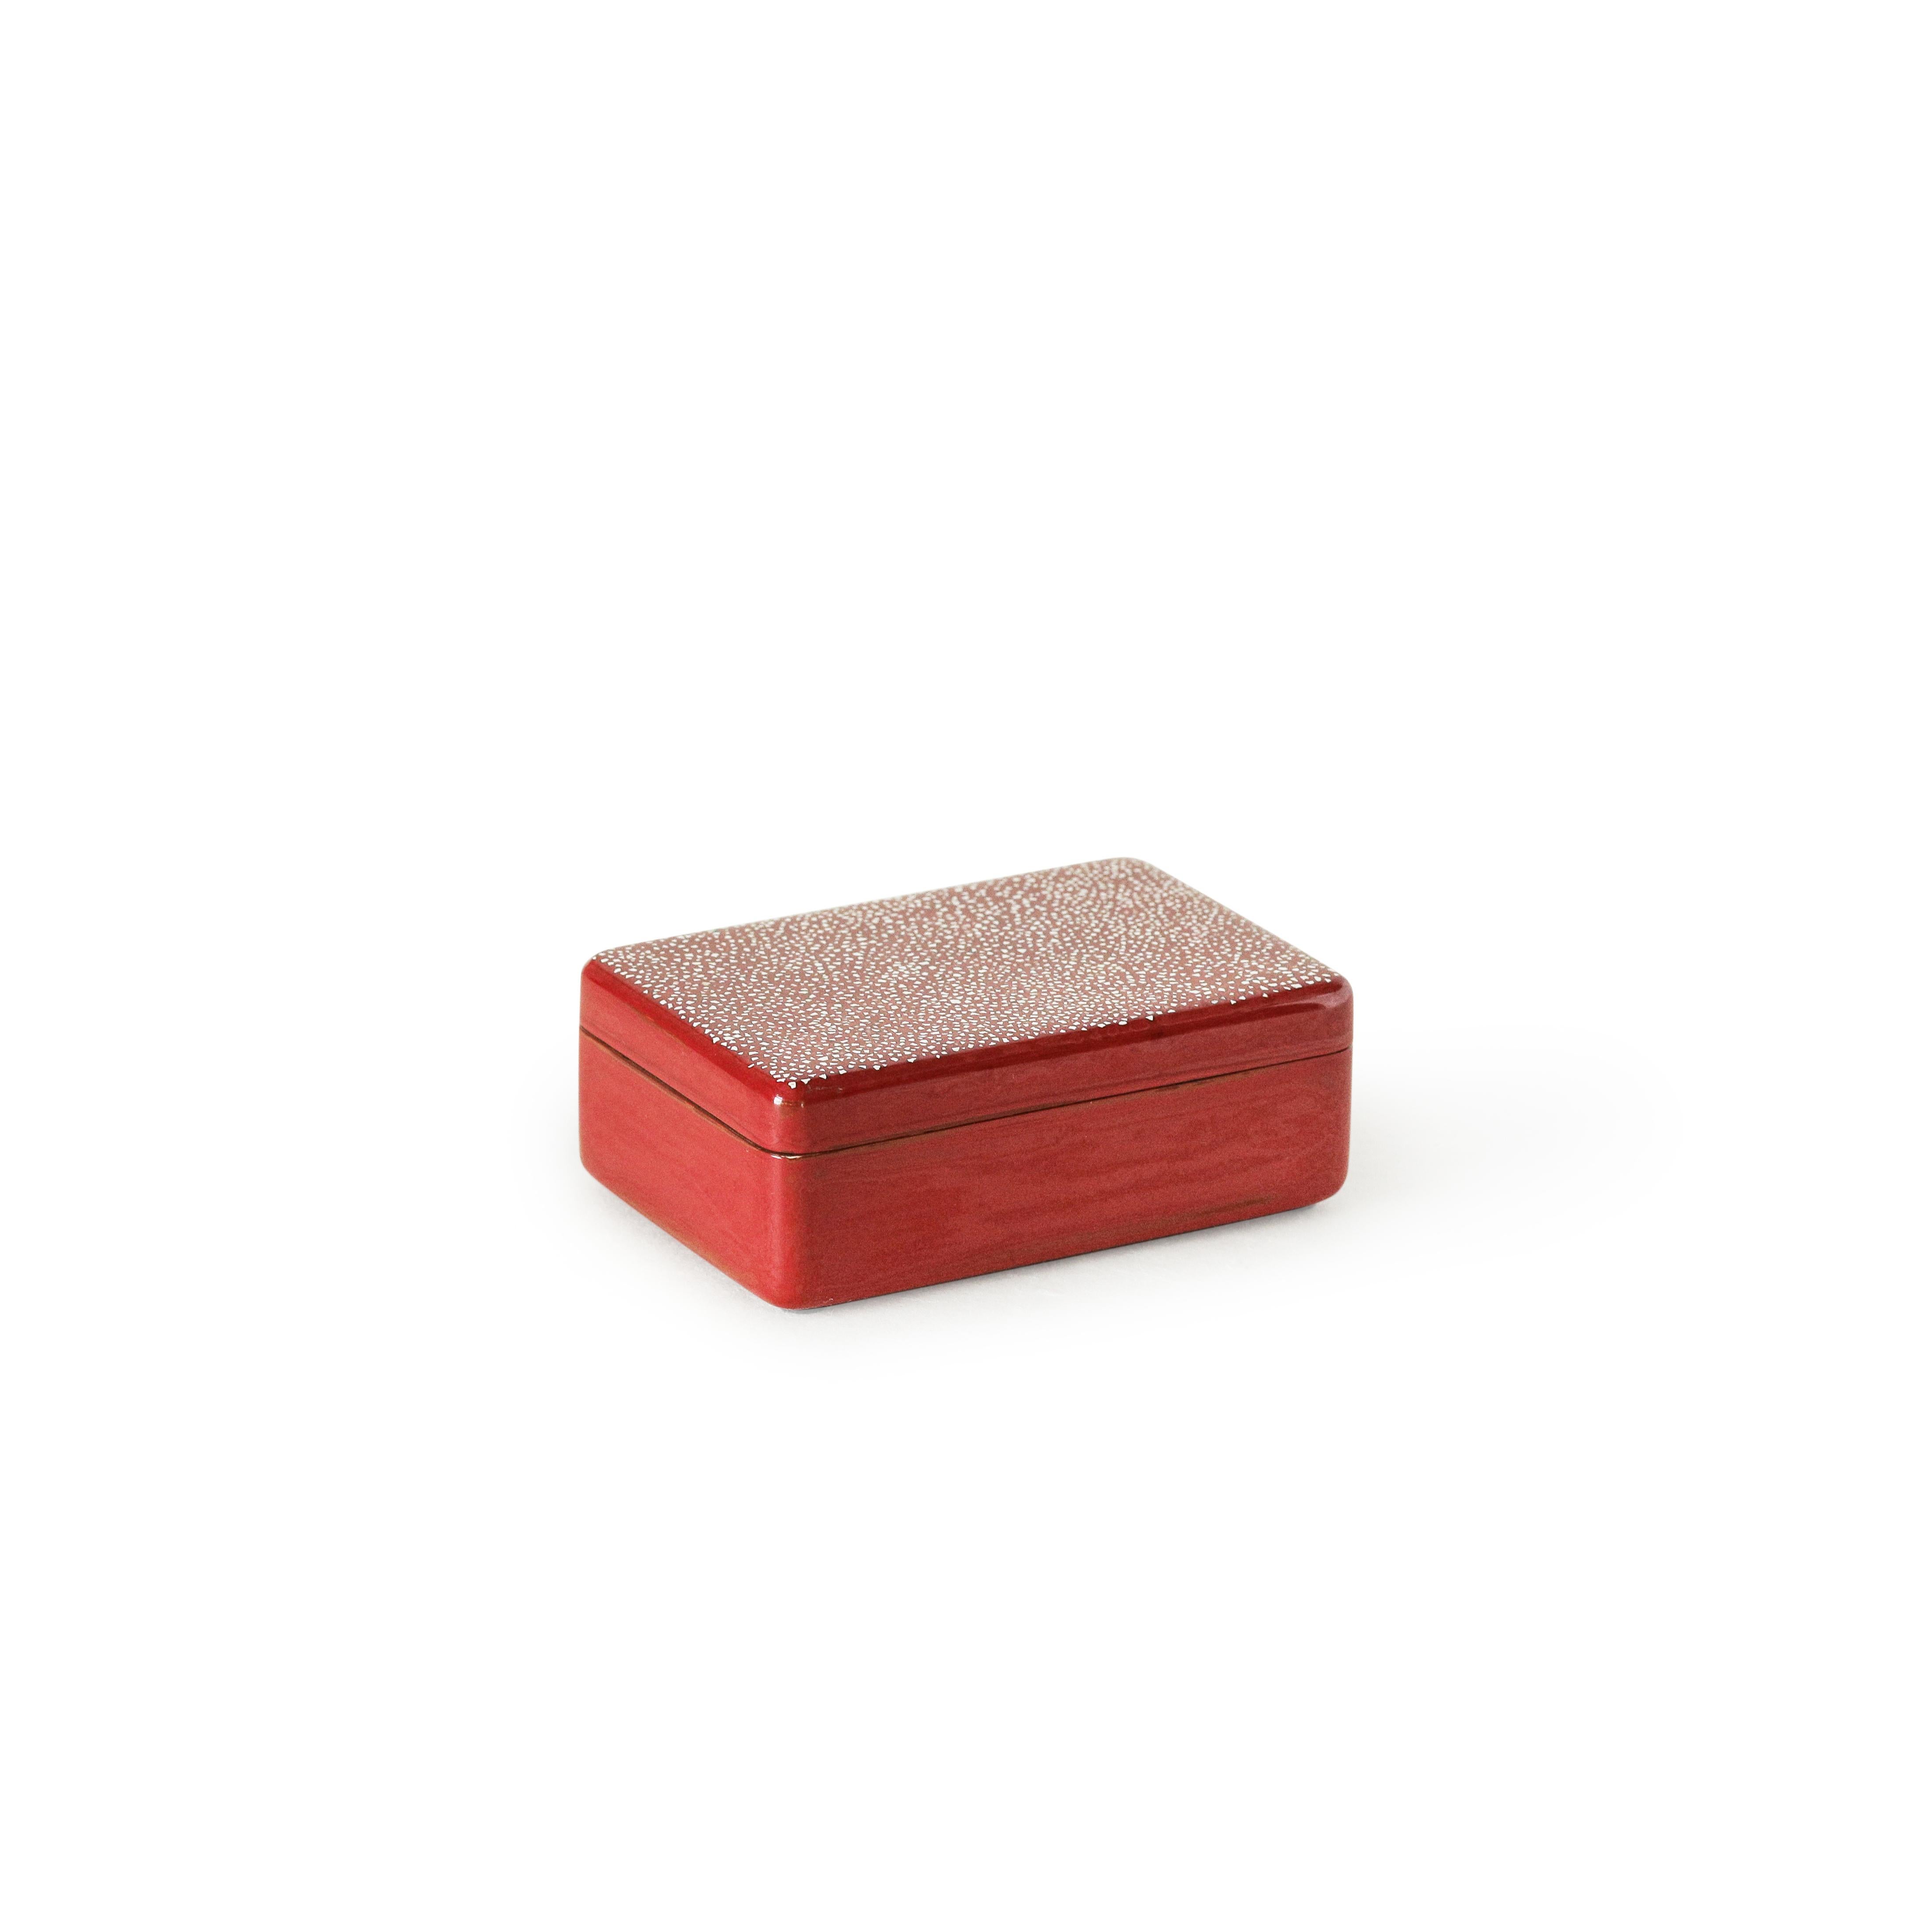 Urushi Natural Red Lacquer Allsorts Box - Small by Alexander Lamont